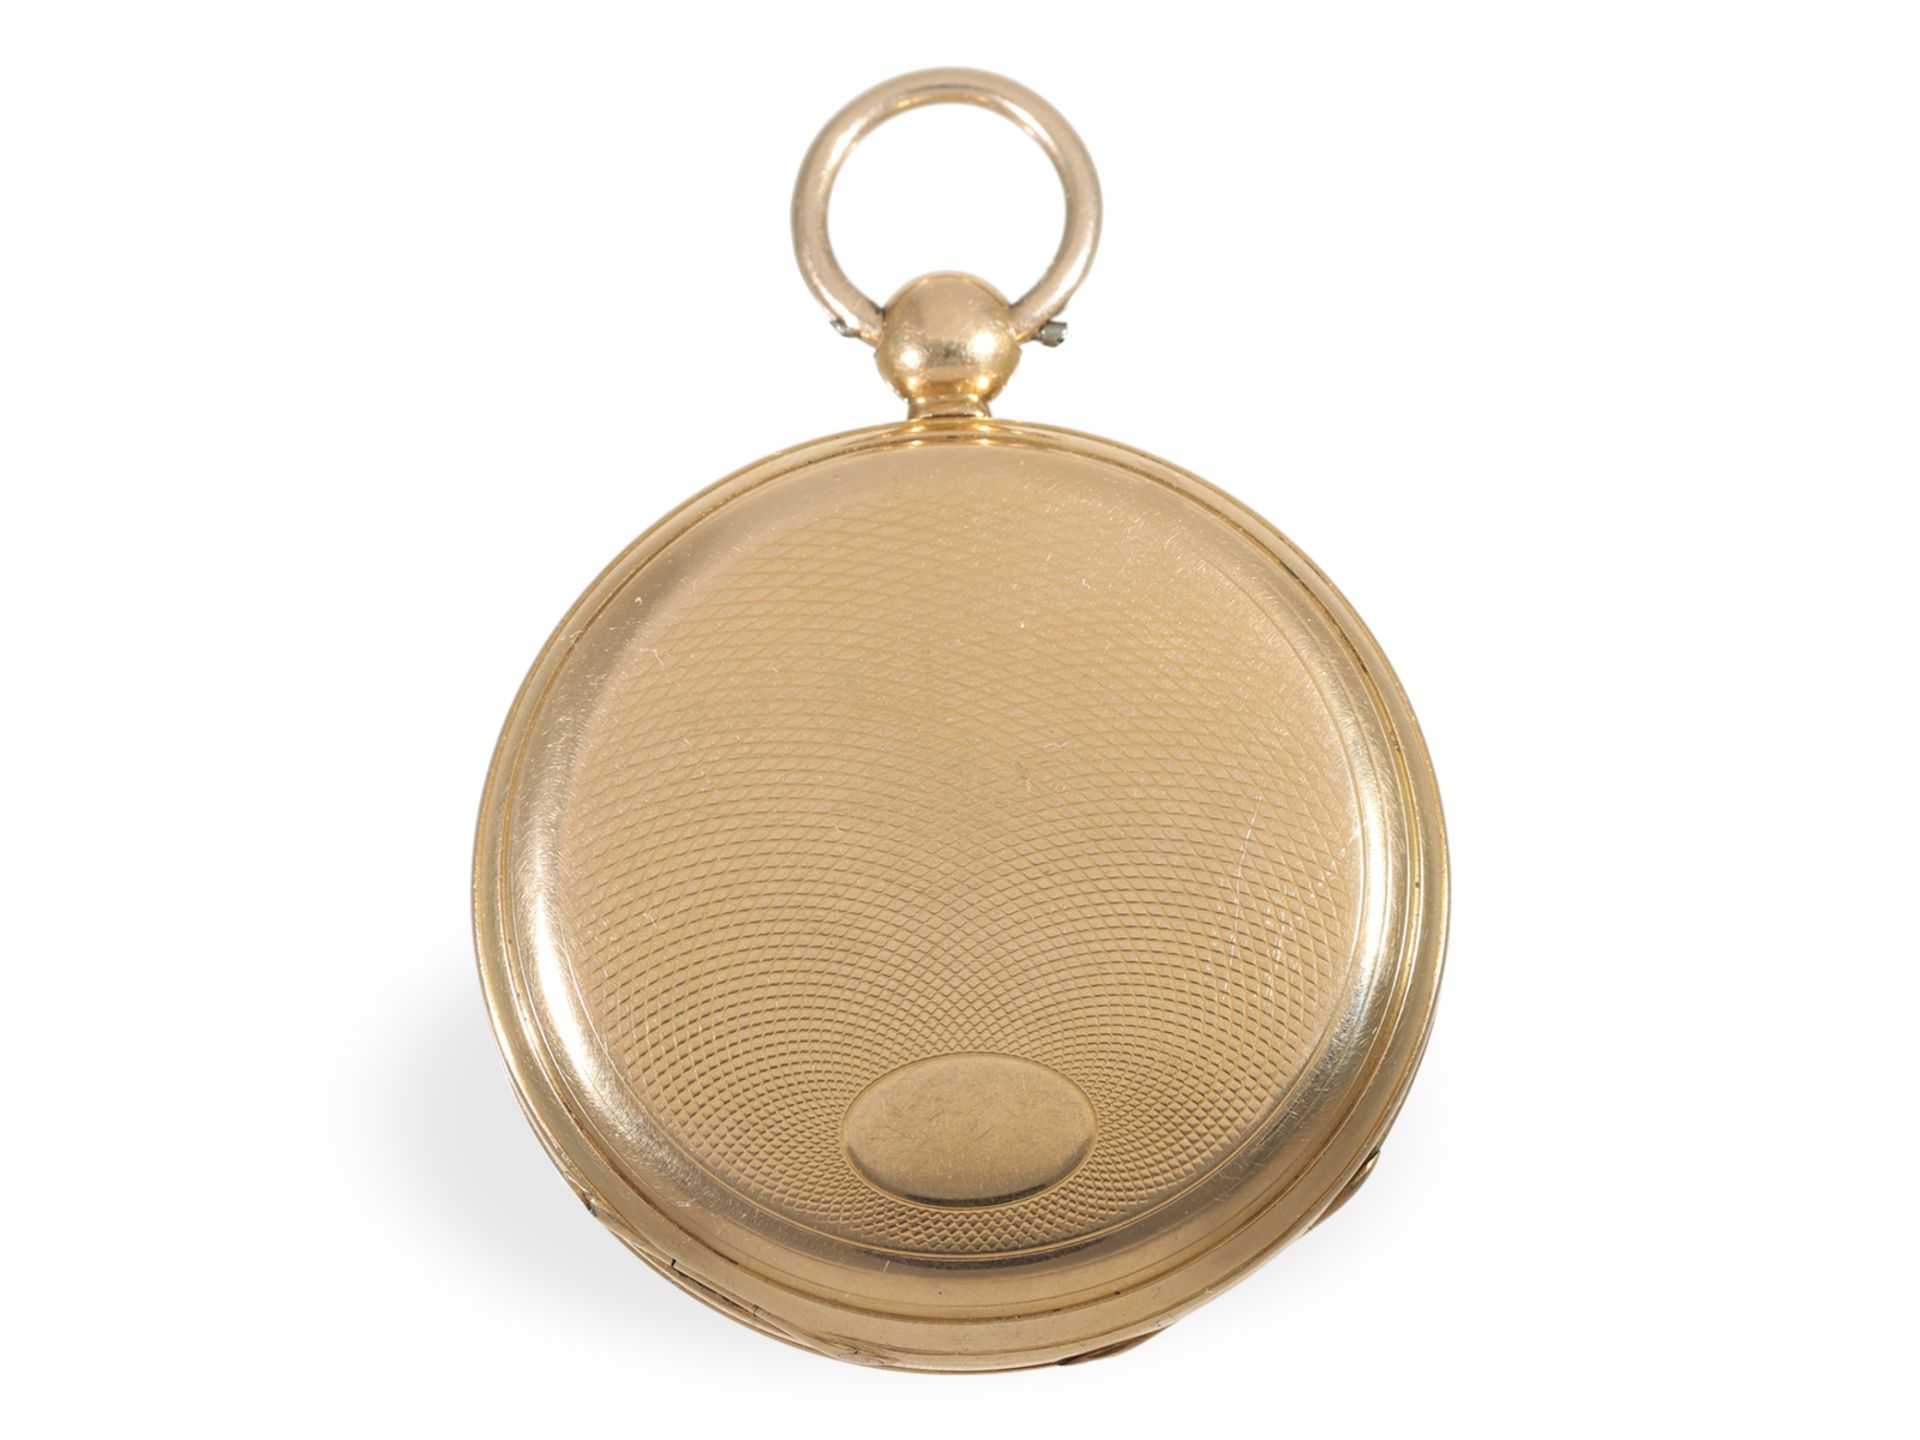 Pocket watch: pink gold lepine in very good condition, ca. 1840 - Image 4 of 4